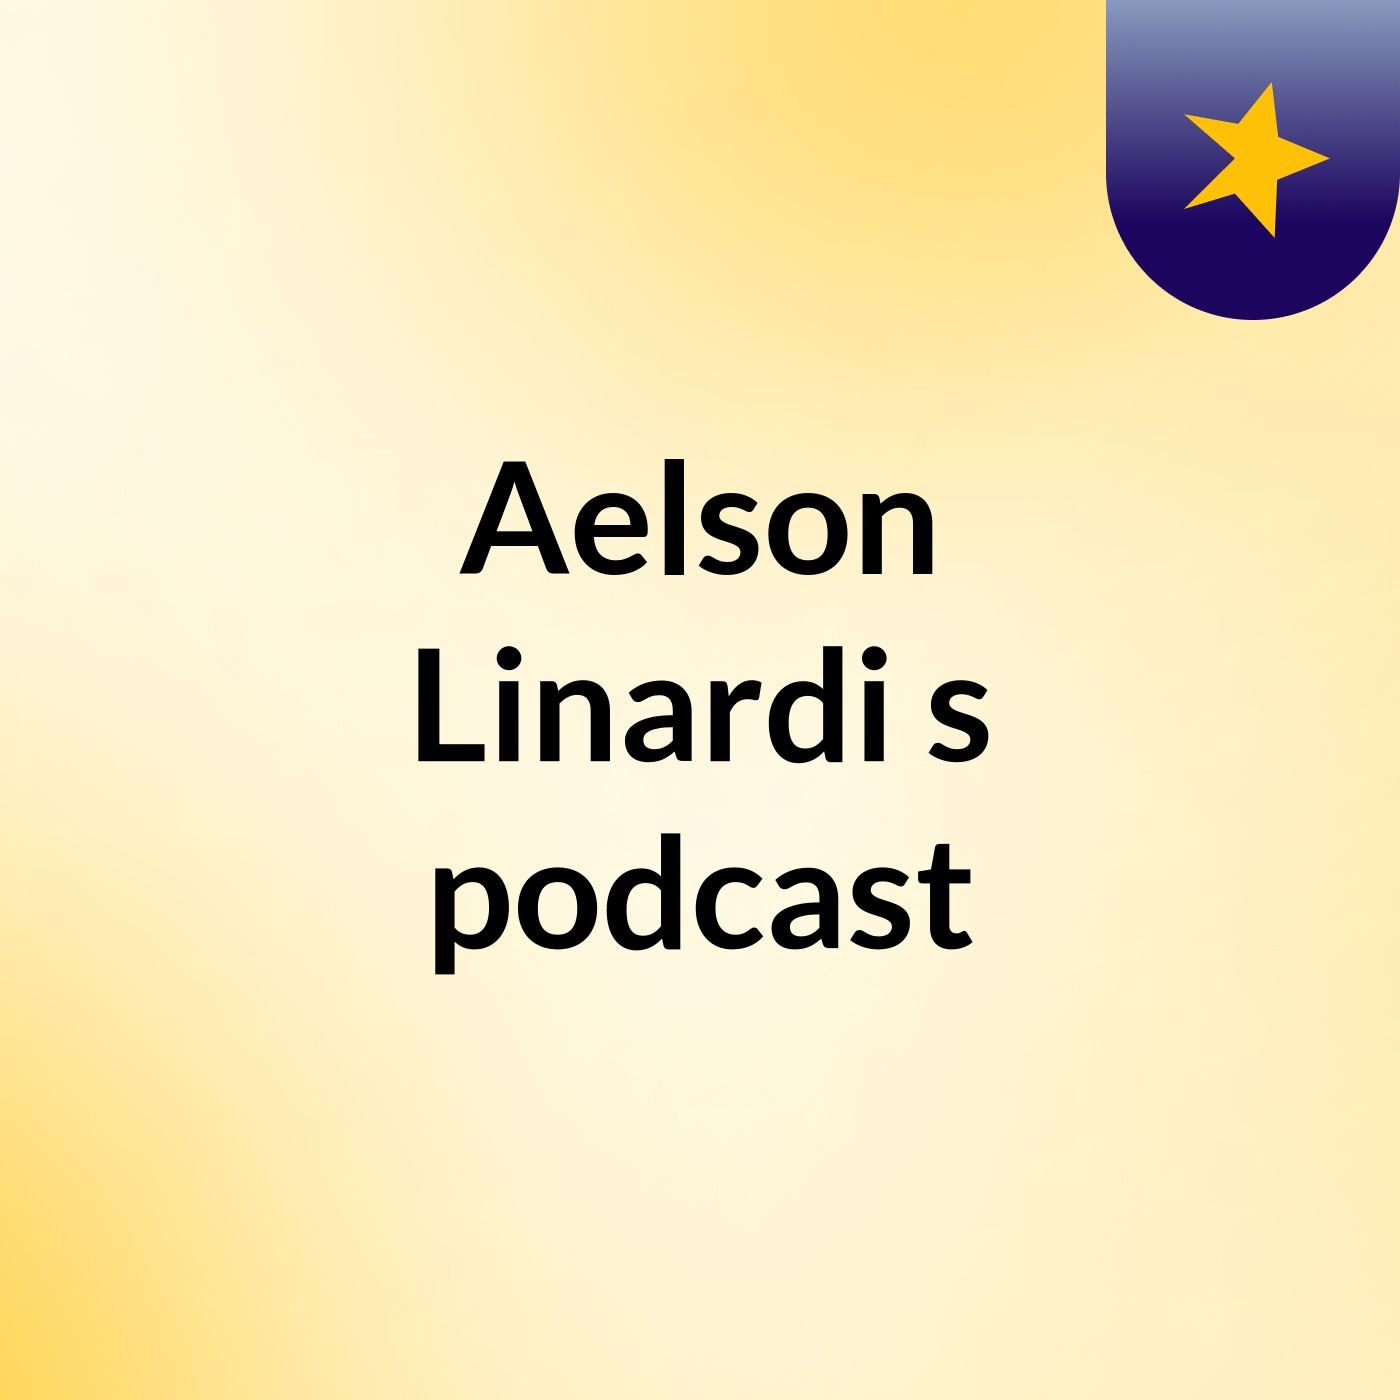 Aelson Linardi's podcast